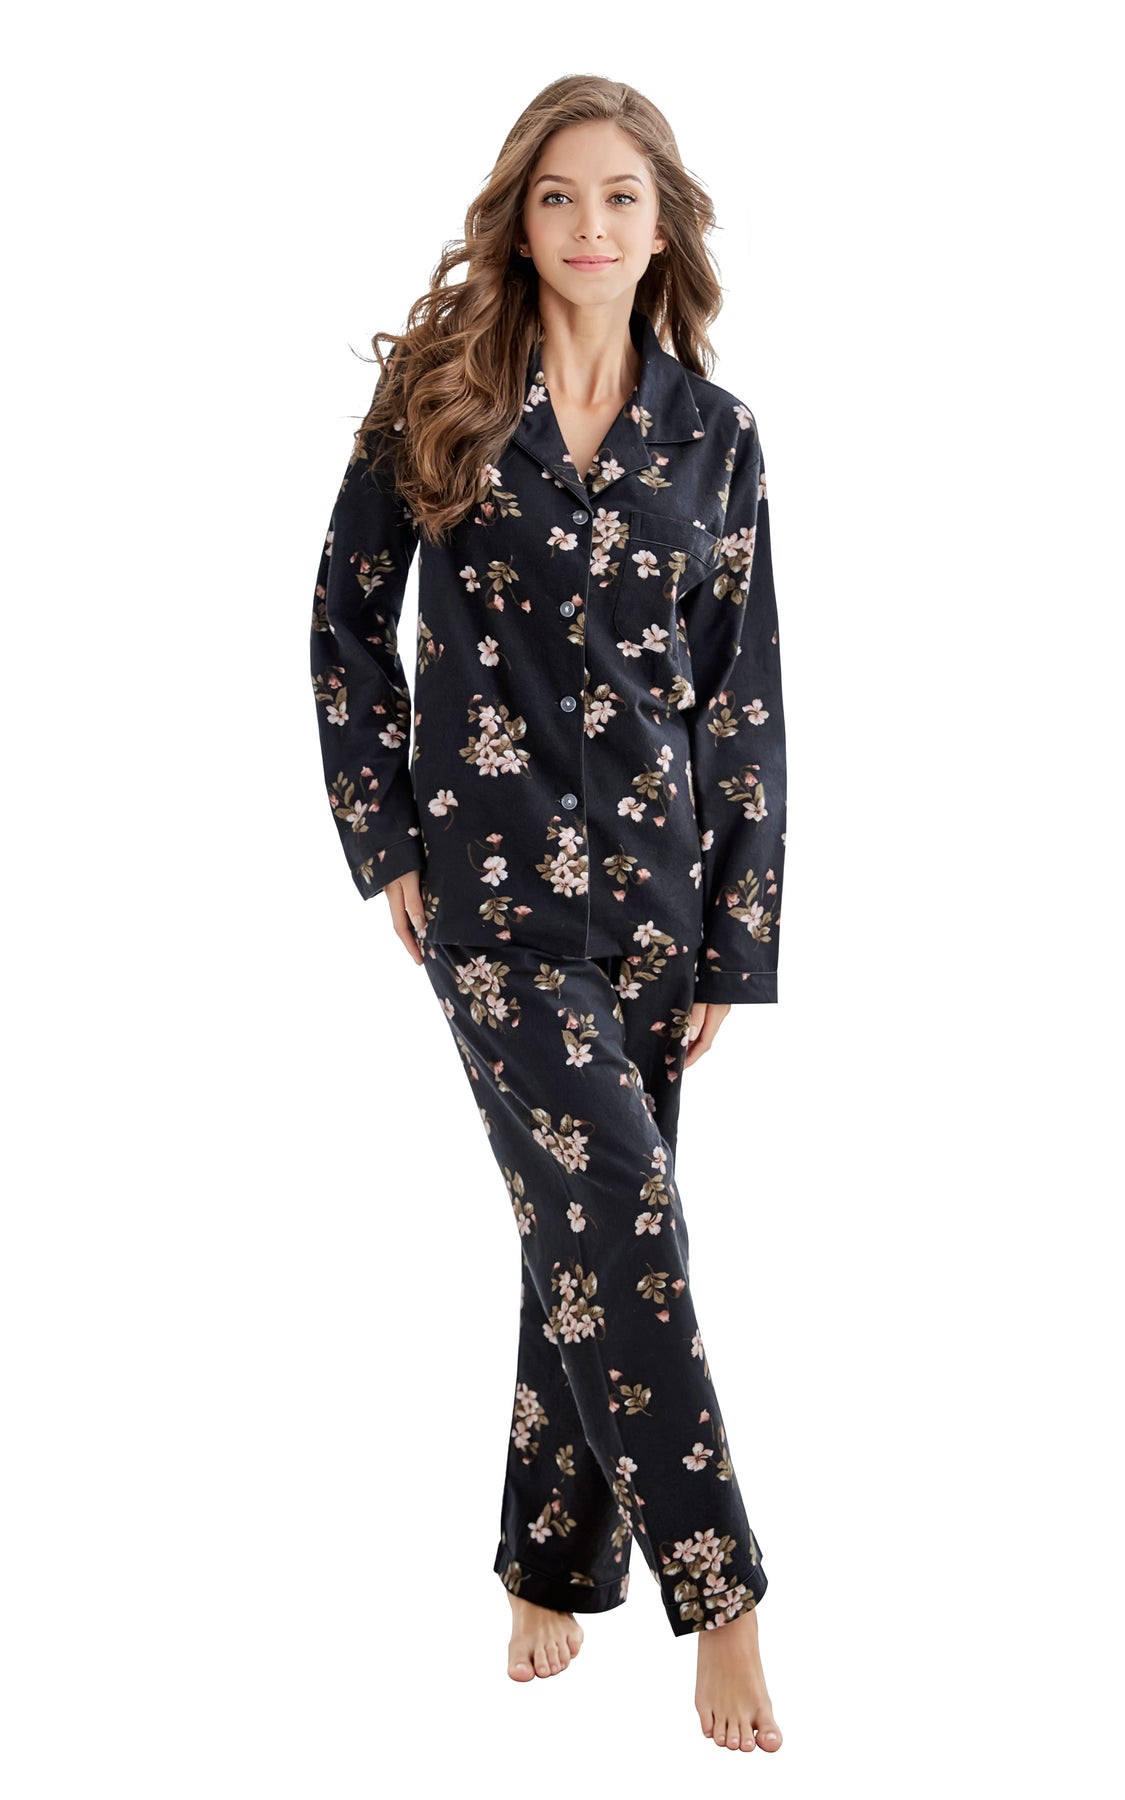 Womens Cotton Long Sleeve Flannel Pajama Set Black Floral Print Tony And Candice